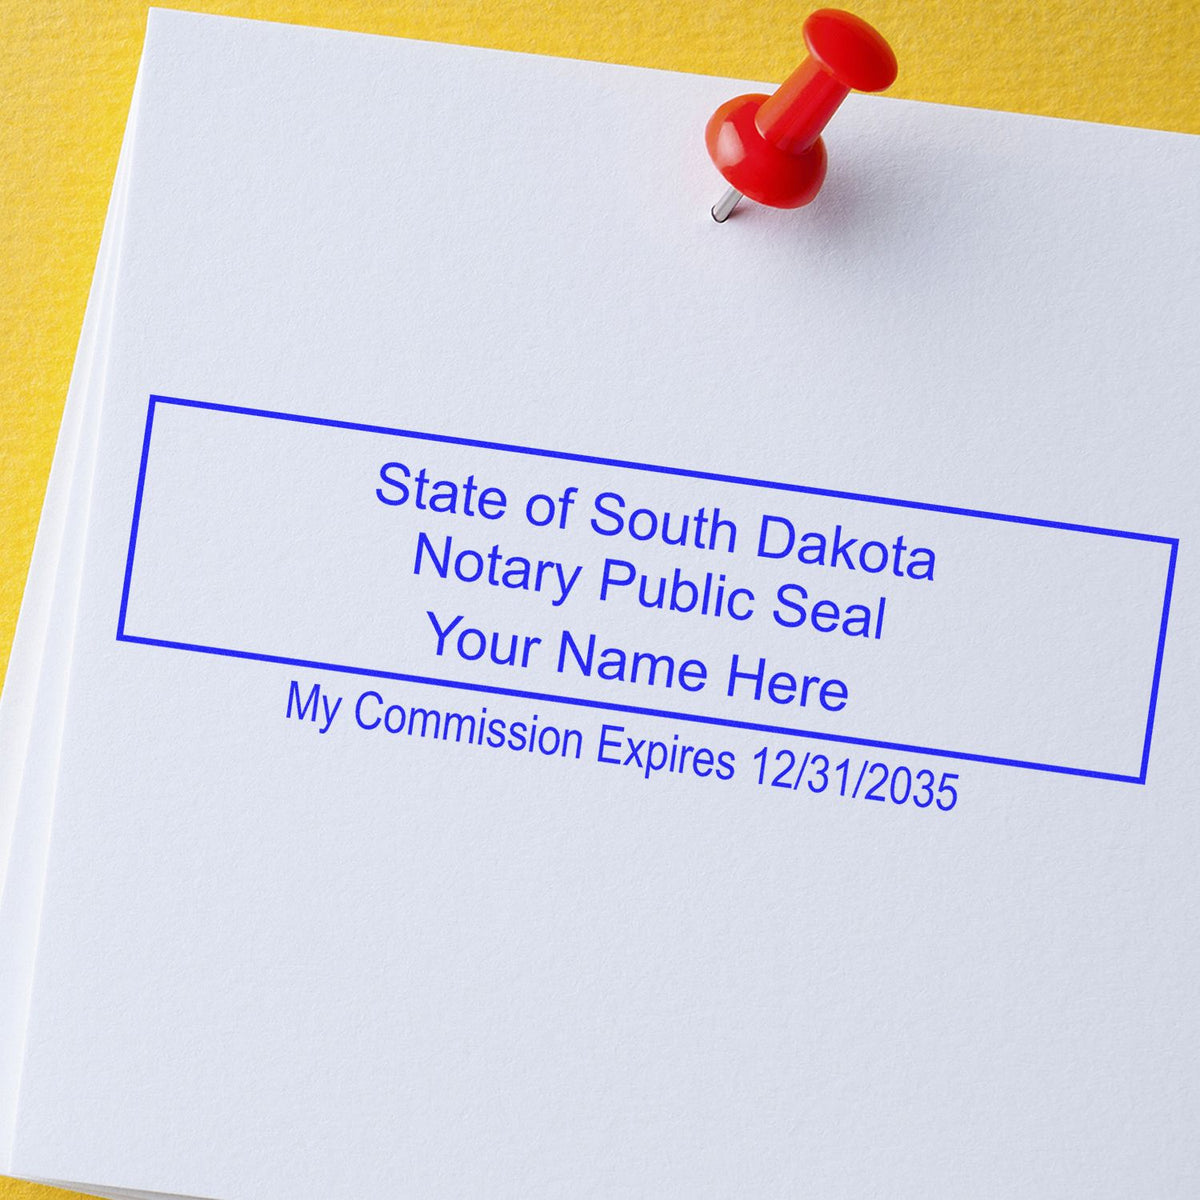 This paper is stamped with a sample imprint of the Slim Pre-Inked Rectangular Notary Stamp for South Dakota, signifying its quality and reliability.